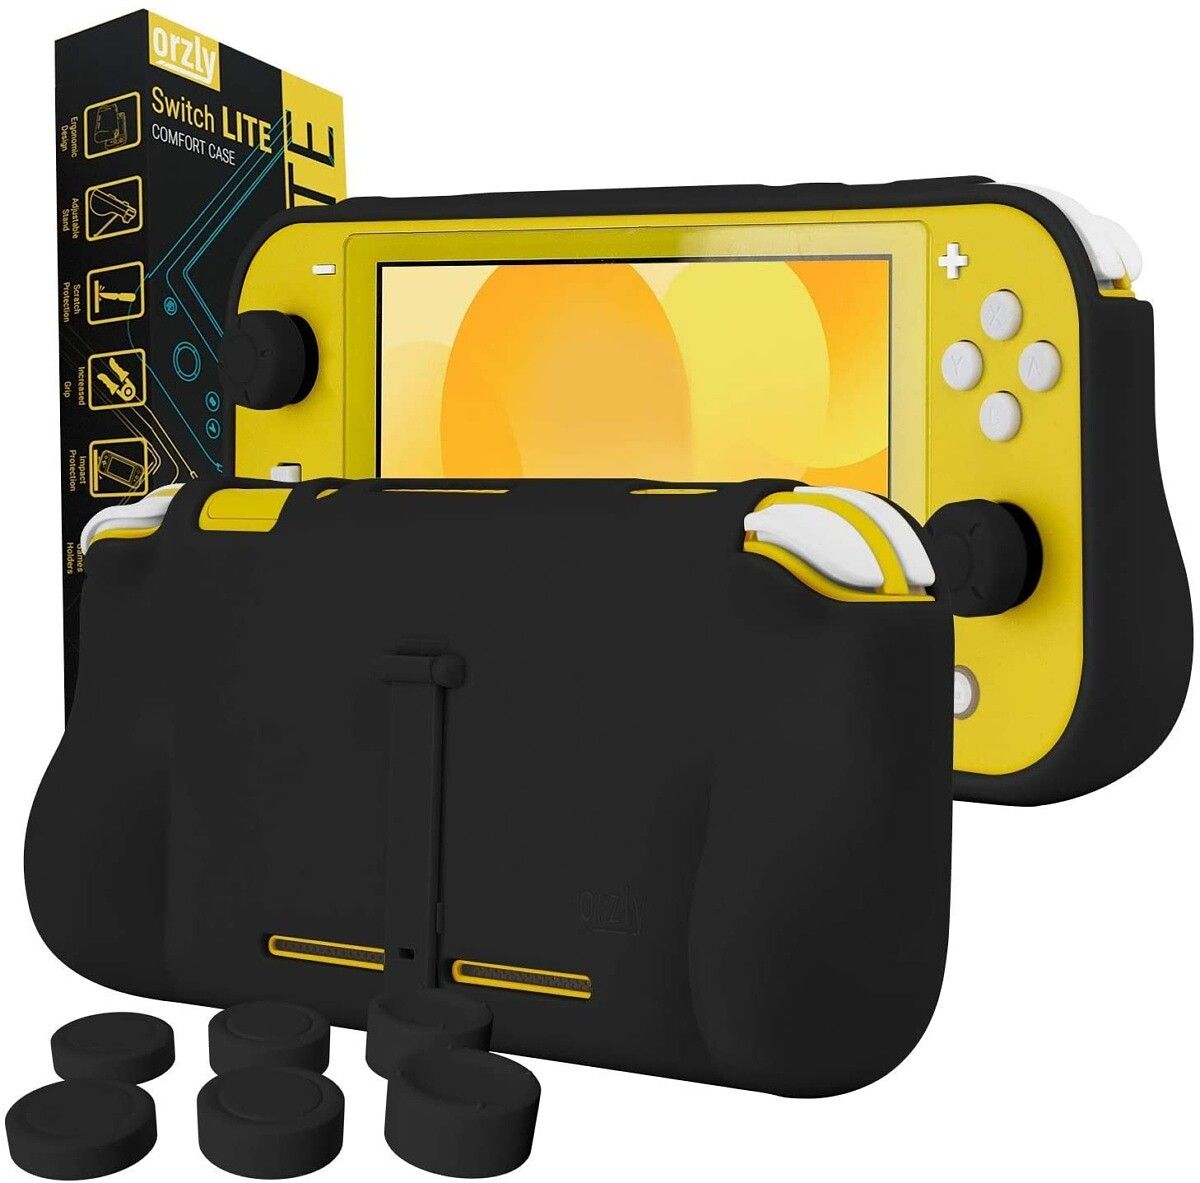 Orzly's grip case is a bulky case for the Switch Lite? Available in ten styles, this case protects against shocks, makes your Switch Lite comfortable, and comes with analog stick grips.